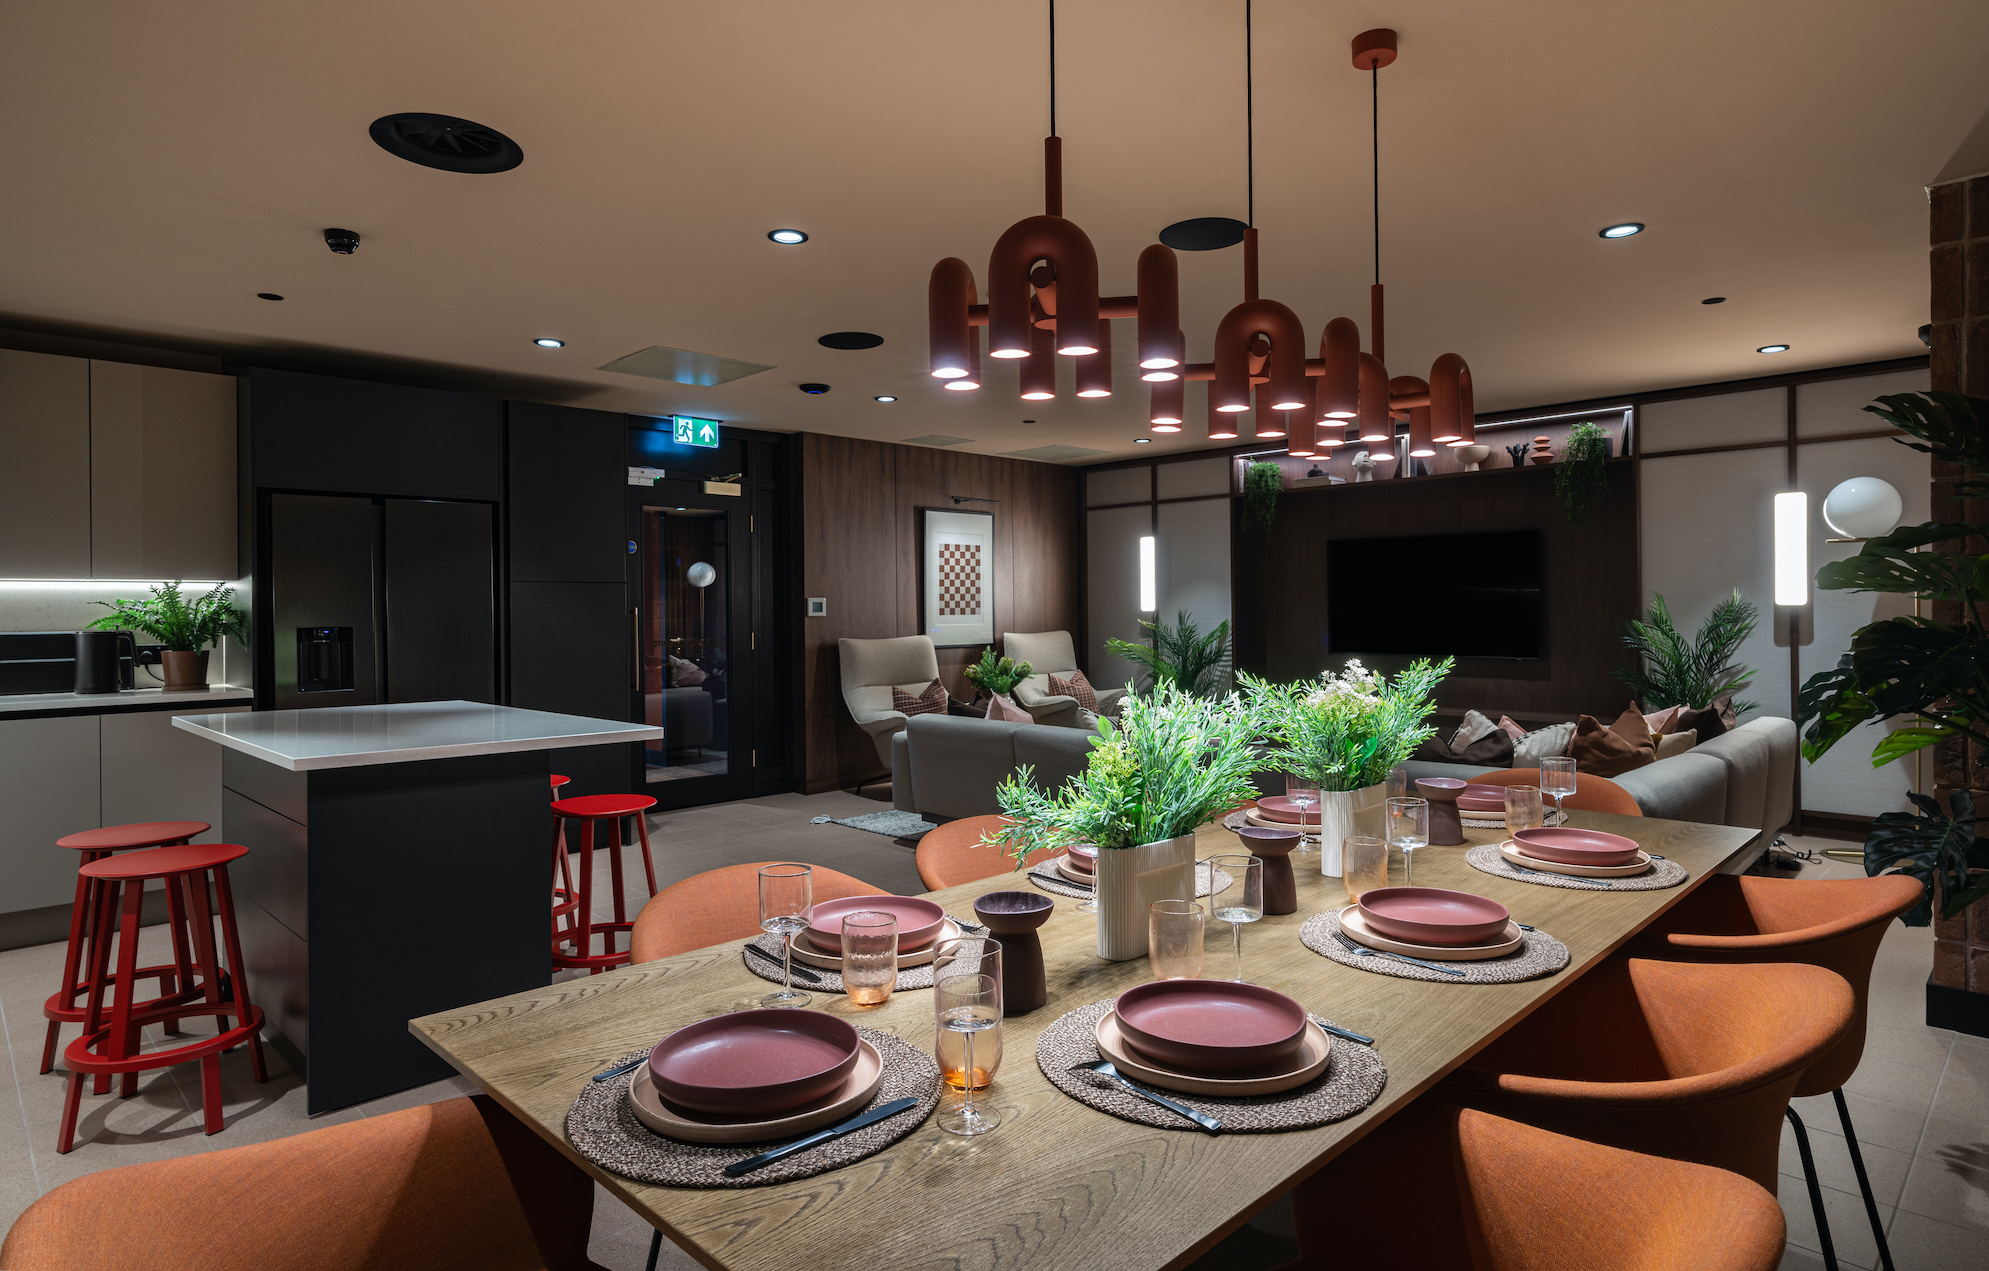 Apartments to Rent by Cortland in Cortland at Colliers Yard, Salford, M3, private dining